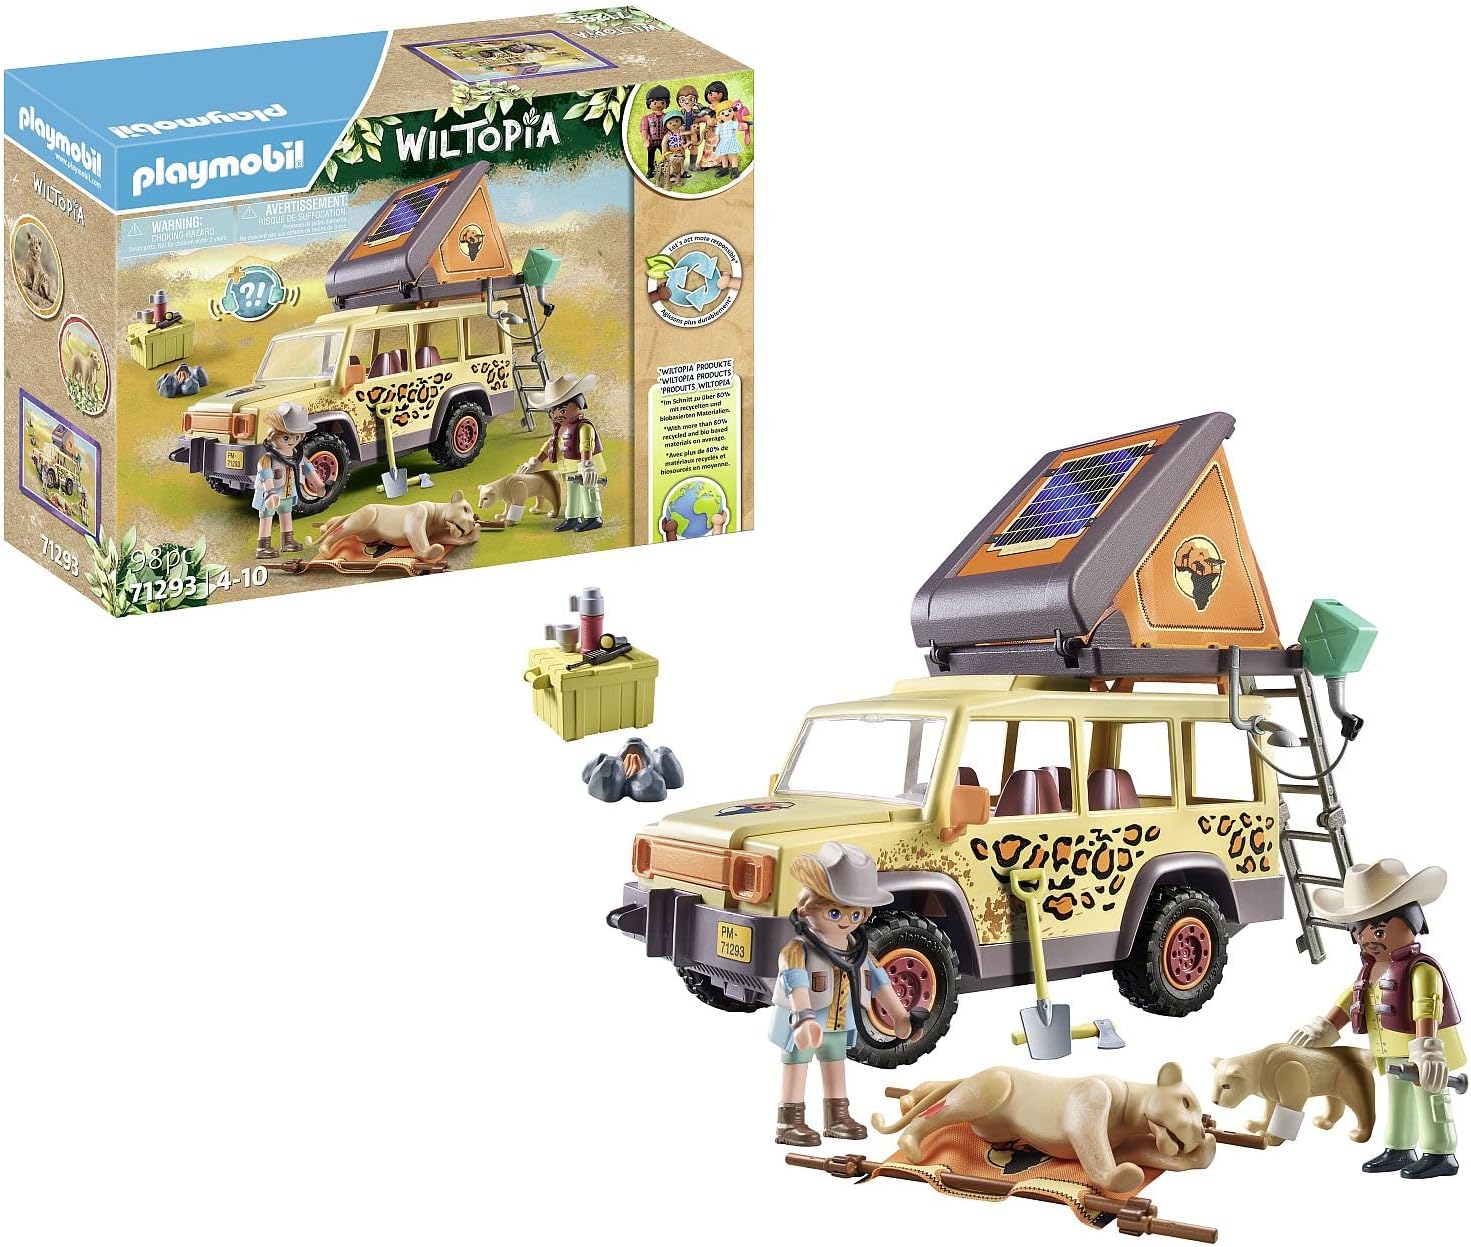 PLAYMOBIL Wiltopia 71293 With the Off-Road Vehicle at the Lions, Adventurous Animal Medicine in the Savannah, Educational Toy Made of Sustainable Material, Toy for Children from 4 Years